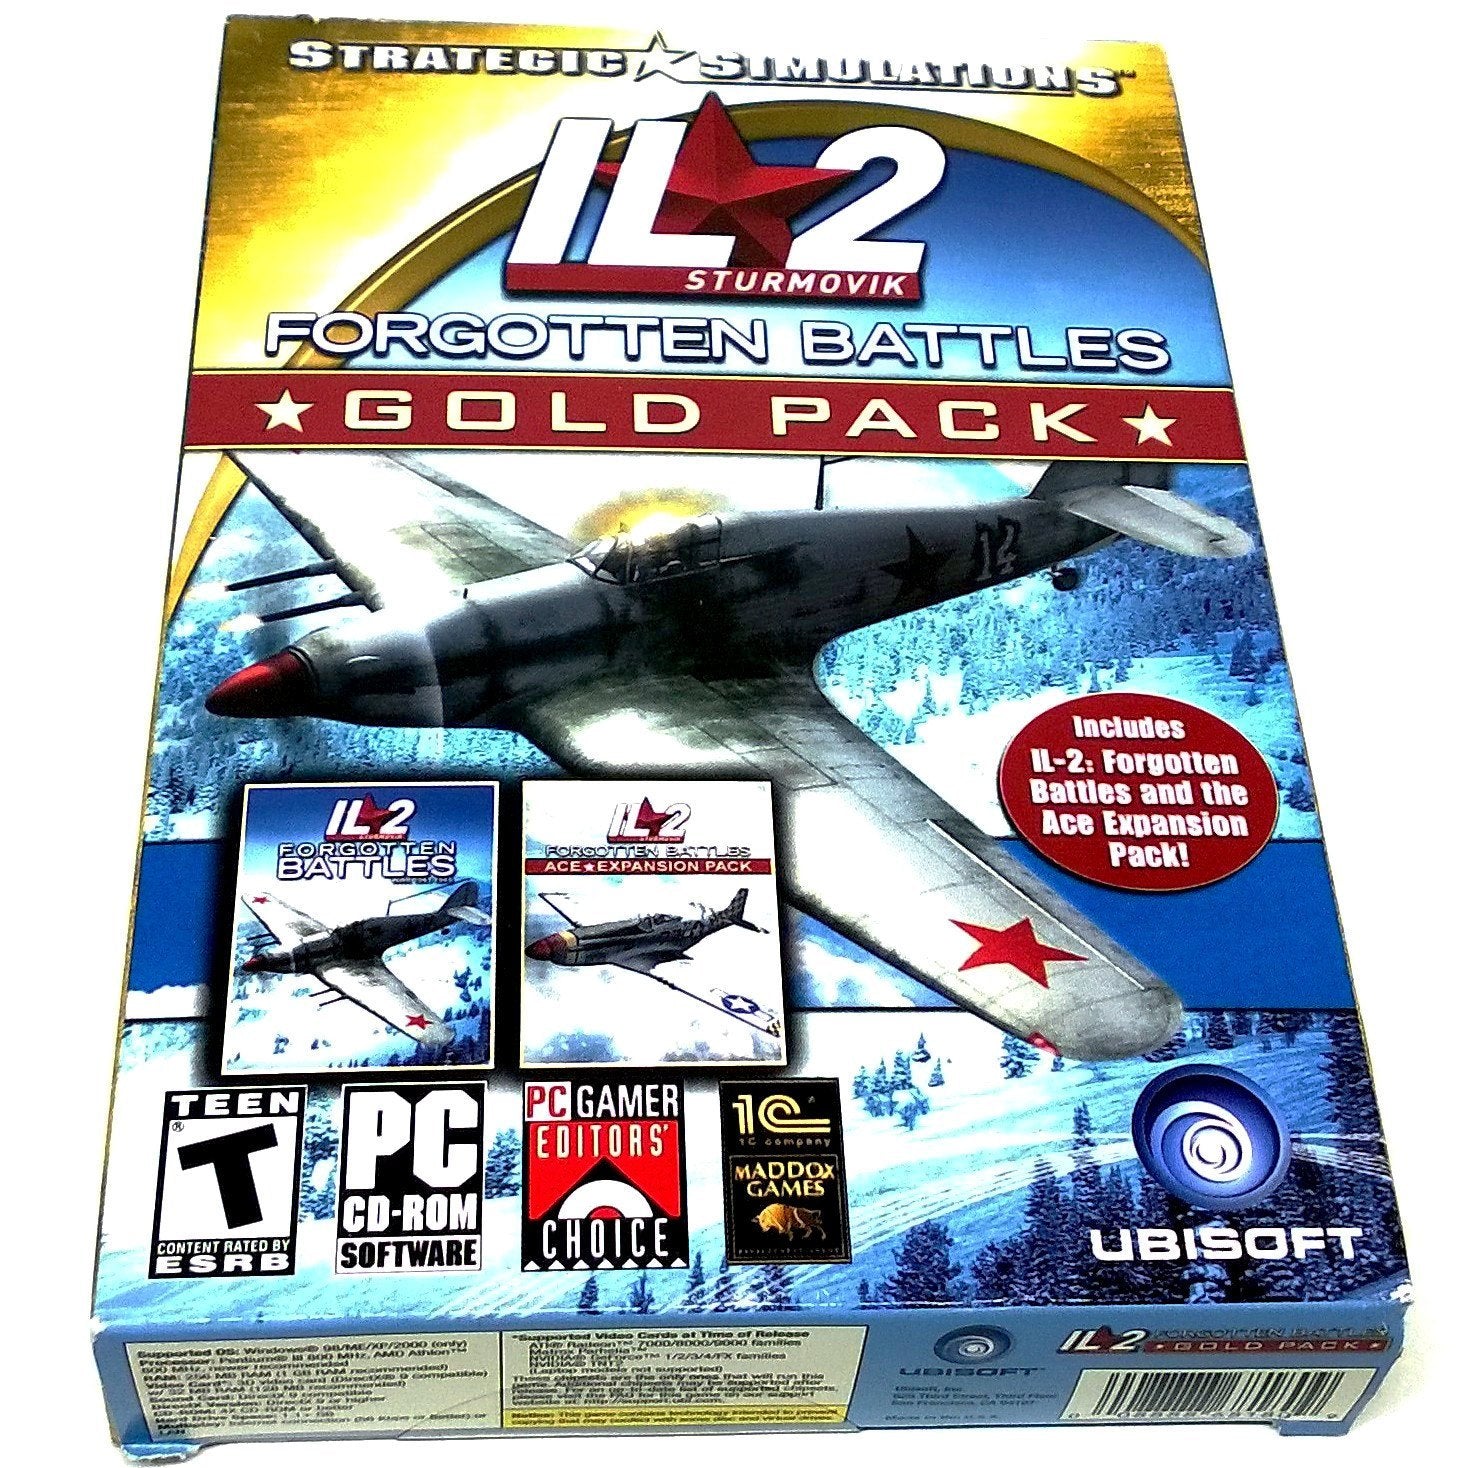 IL-2 Sturmovik: Forgotten Battles (Gold Pack Edition) for PC CD-ROM - Front of box